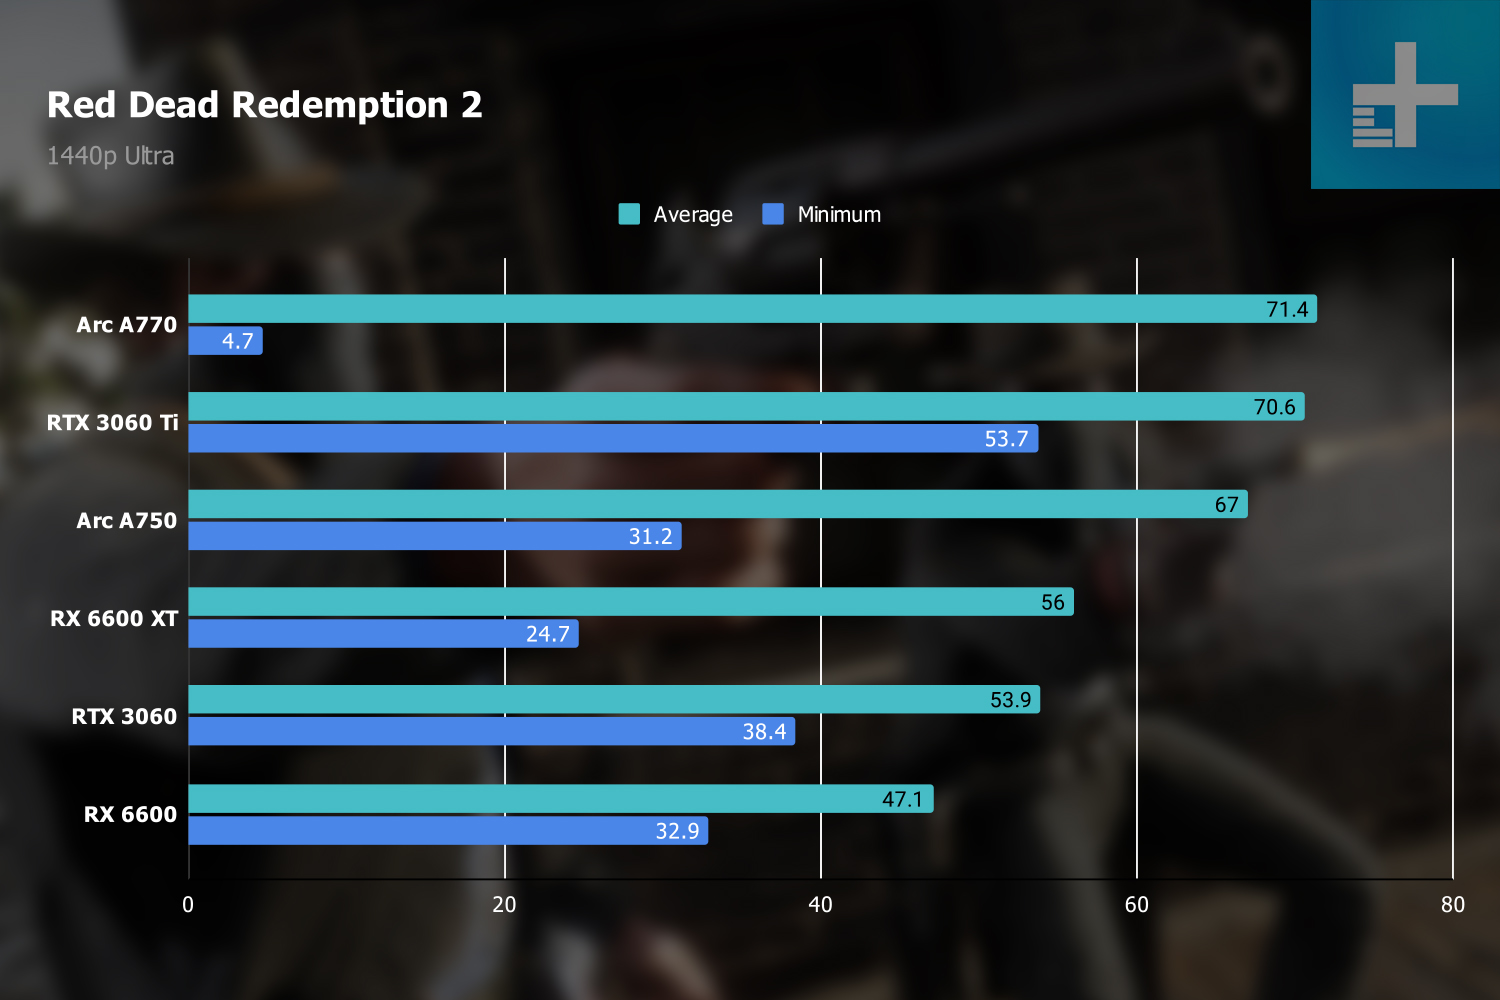 Red Dead Redemption 2 benchmarks at 1440p.